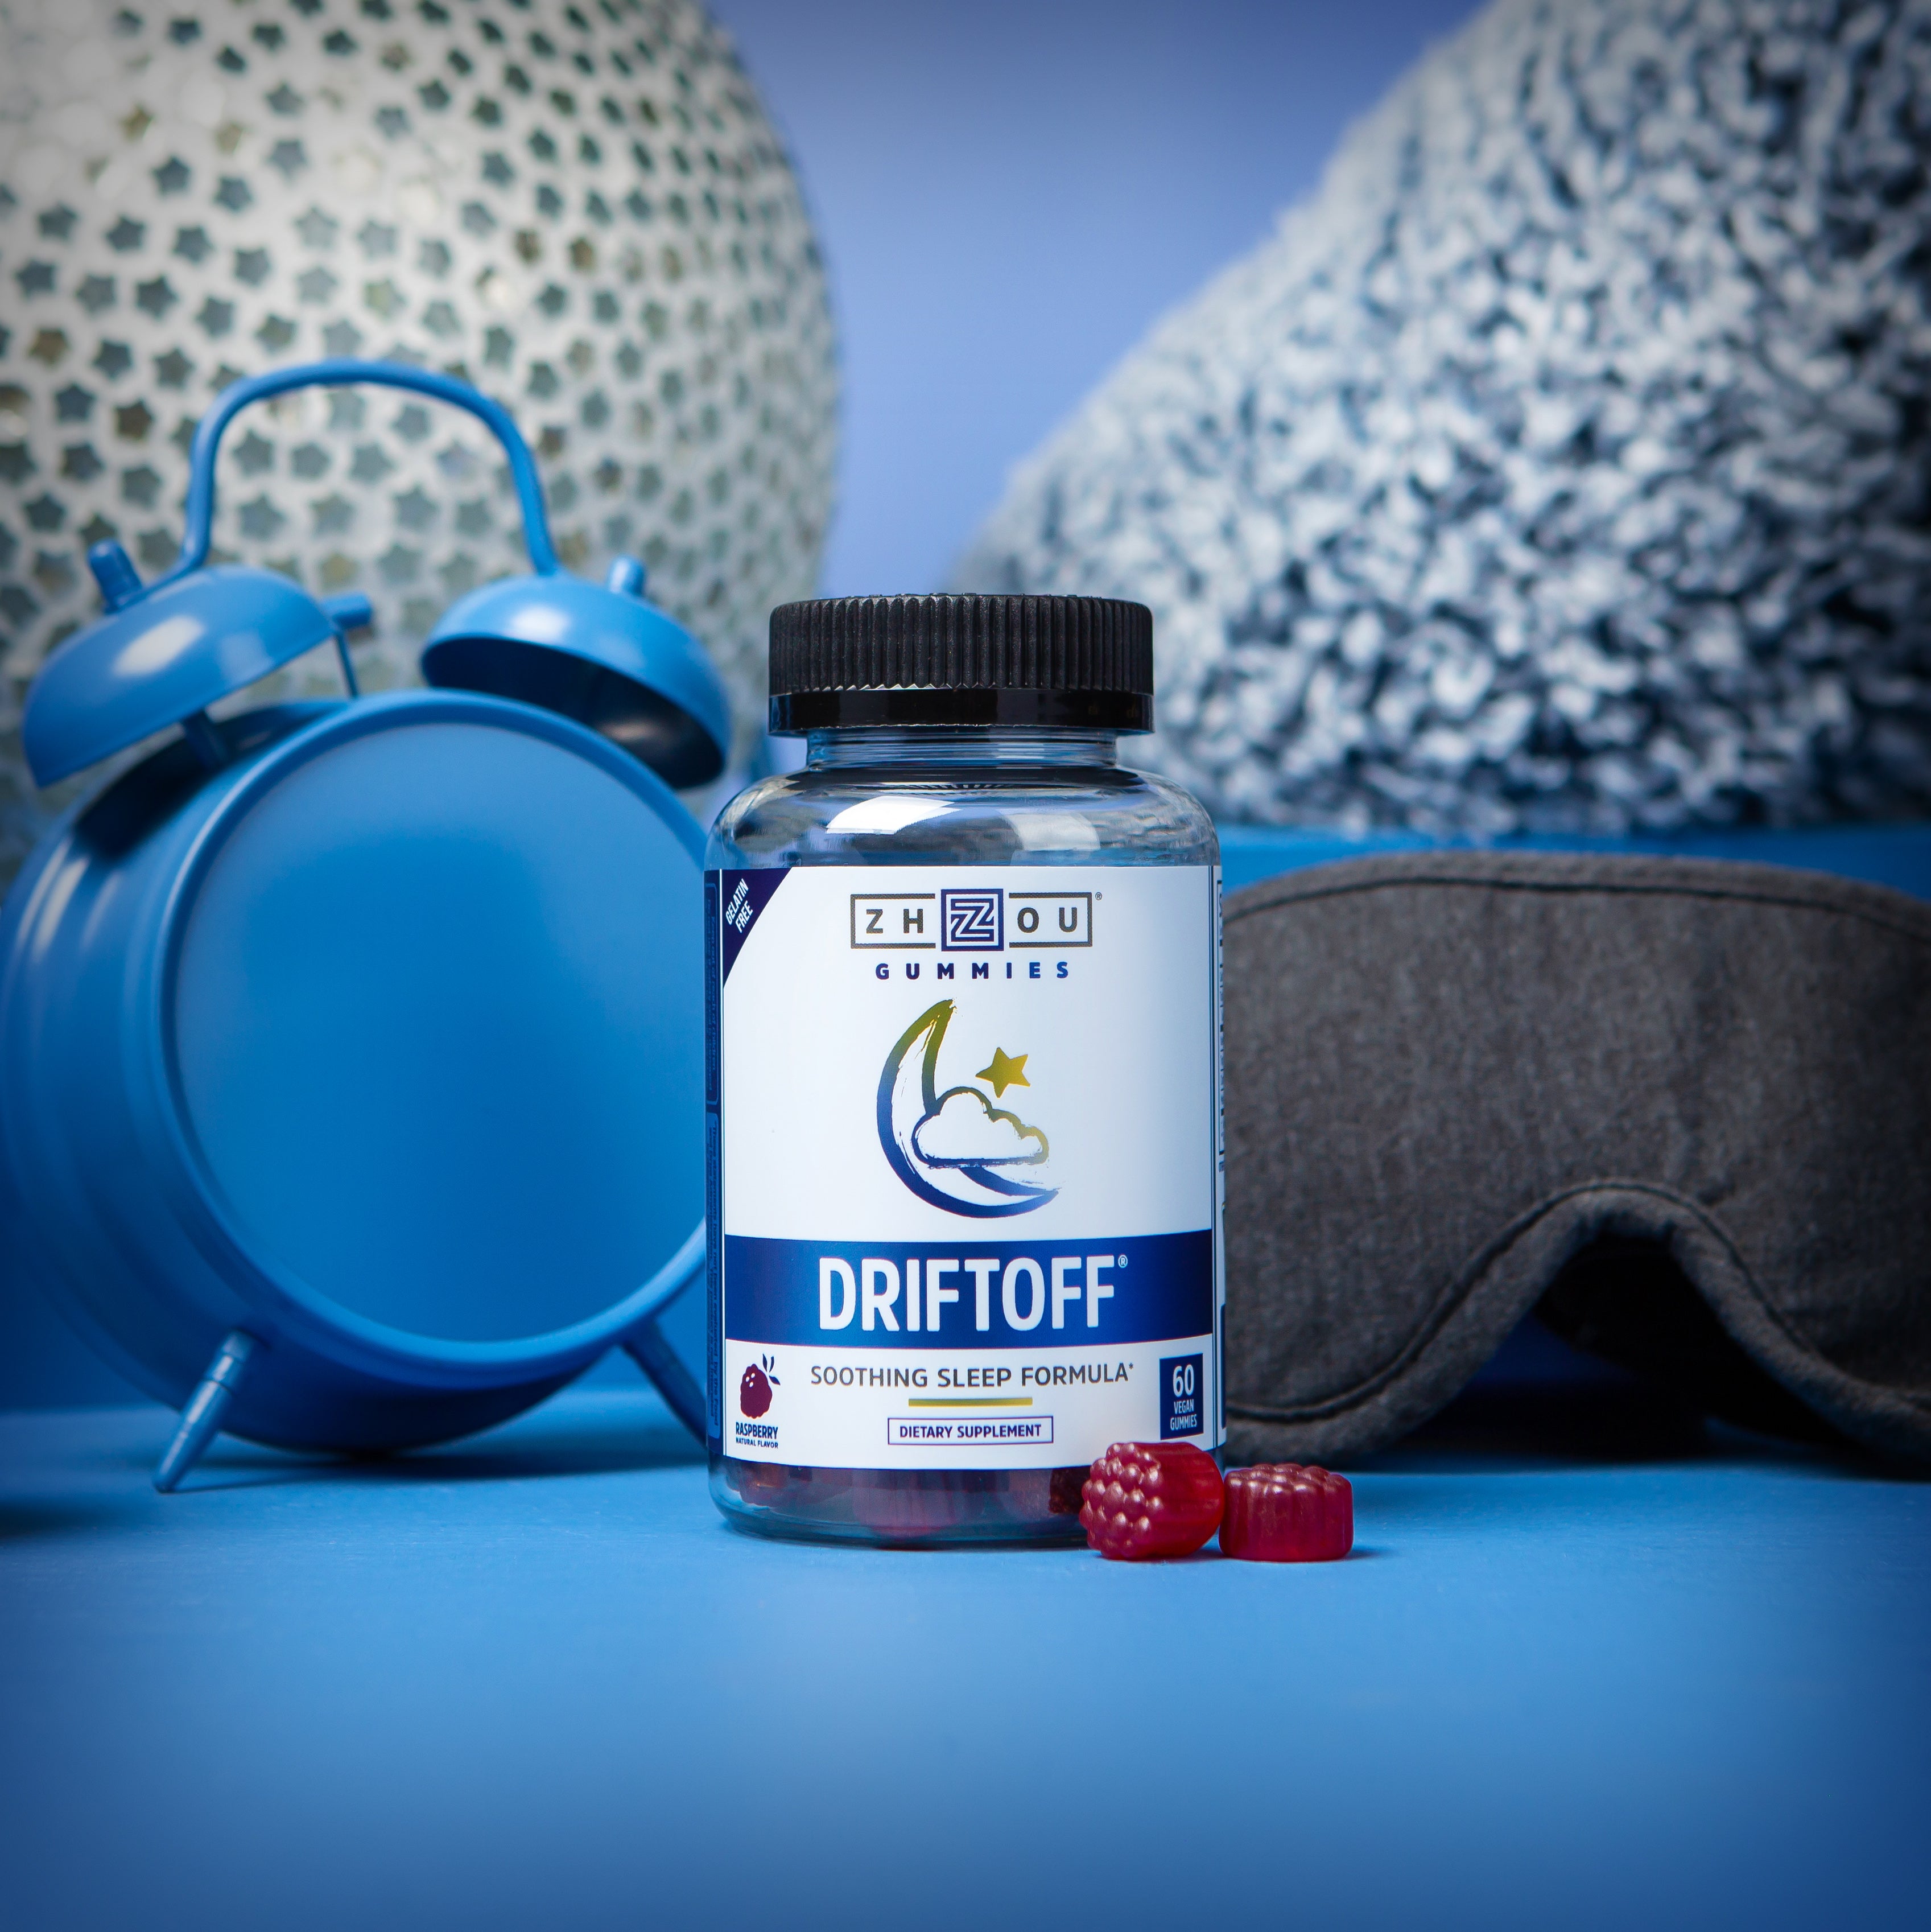 A bottle of Zhou Nutrition’s Driftoff gummies, with a blue background, an alarm clock and a sleeping mask.